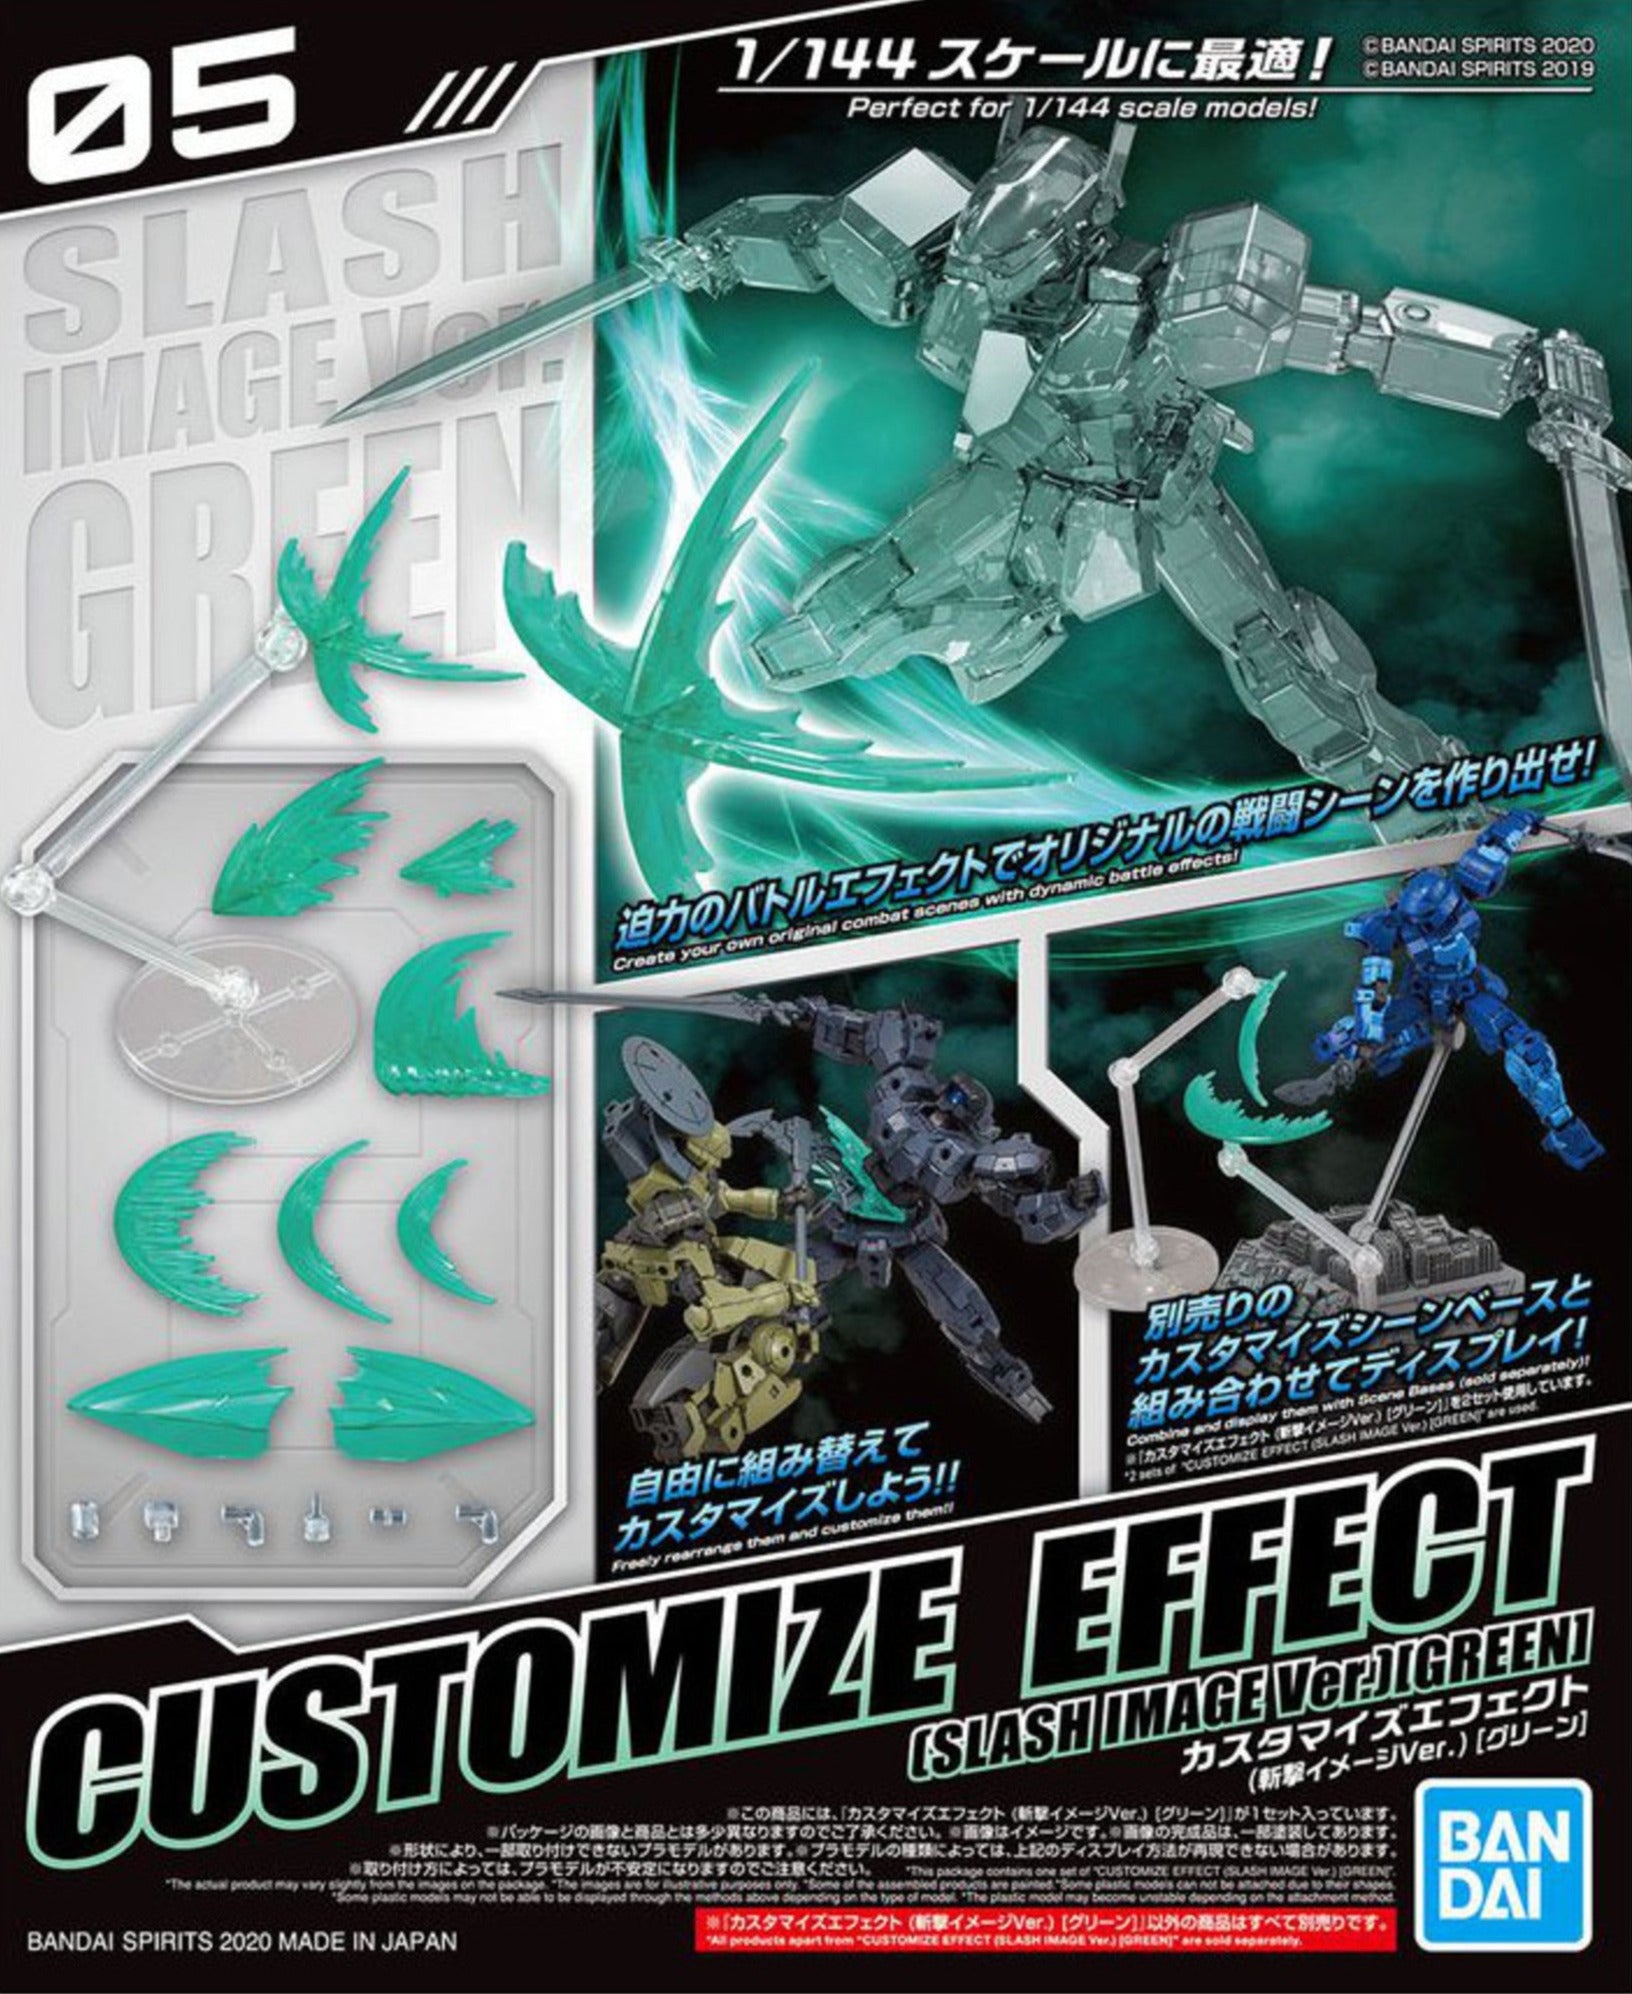 Bandai 30 Minutes Missions Customize Effect #5 Slash Image Ver. (Green) Accessory Effect Kit